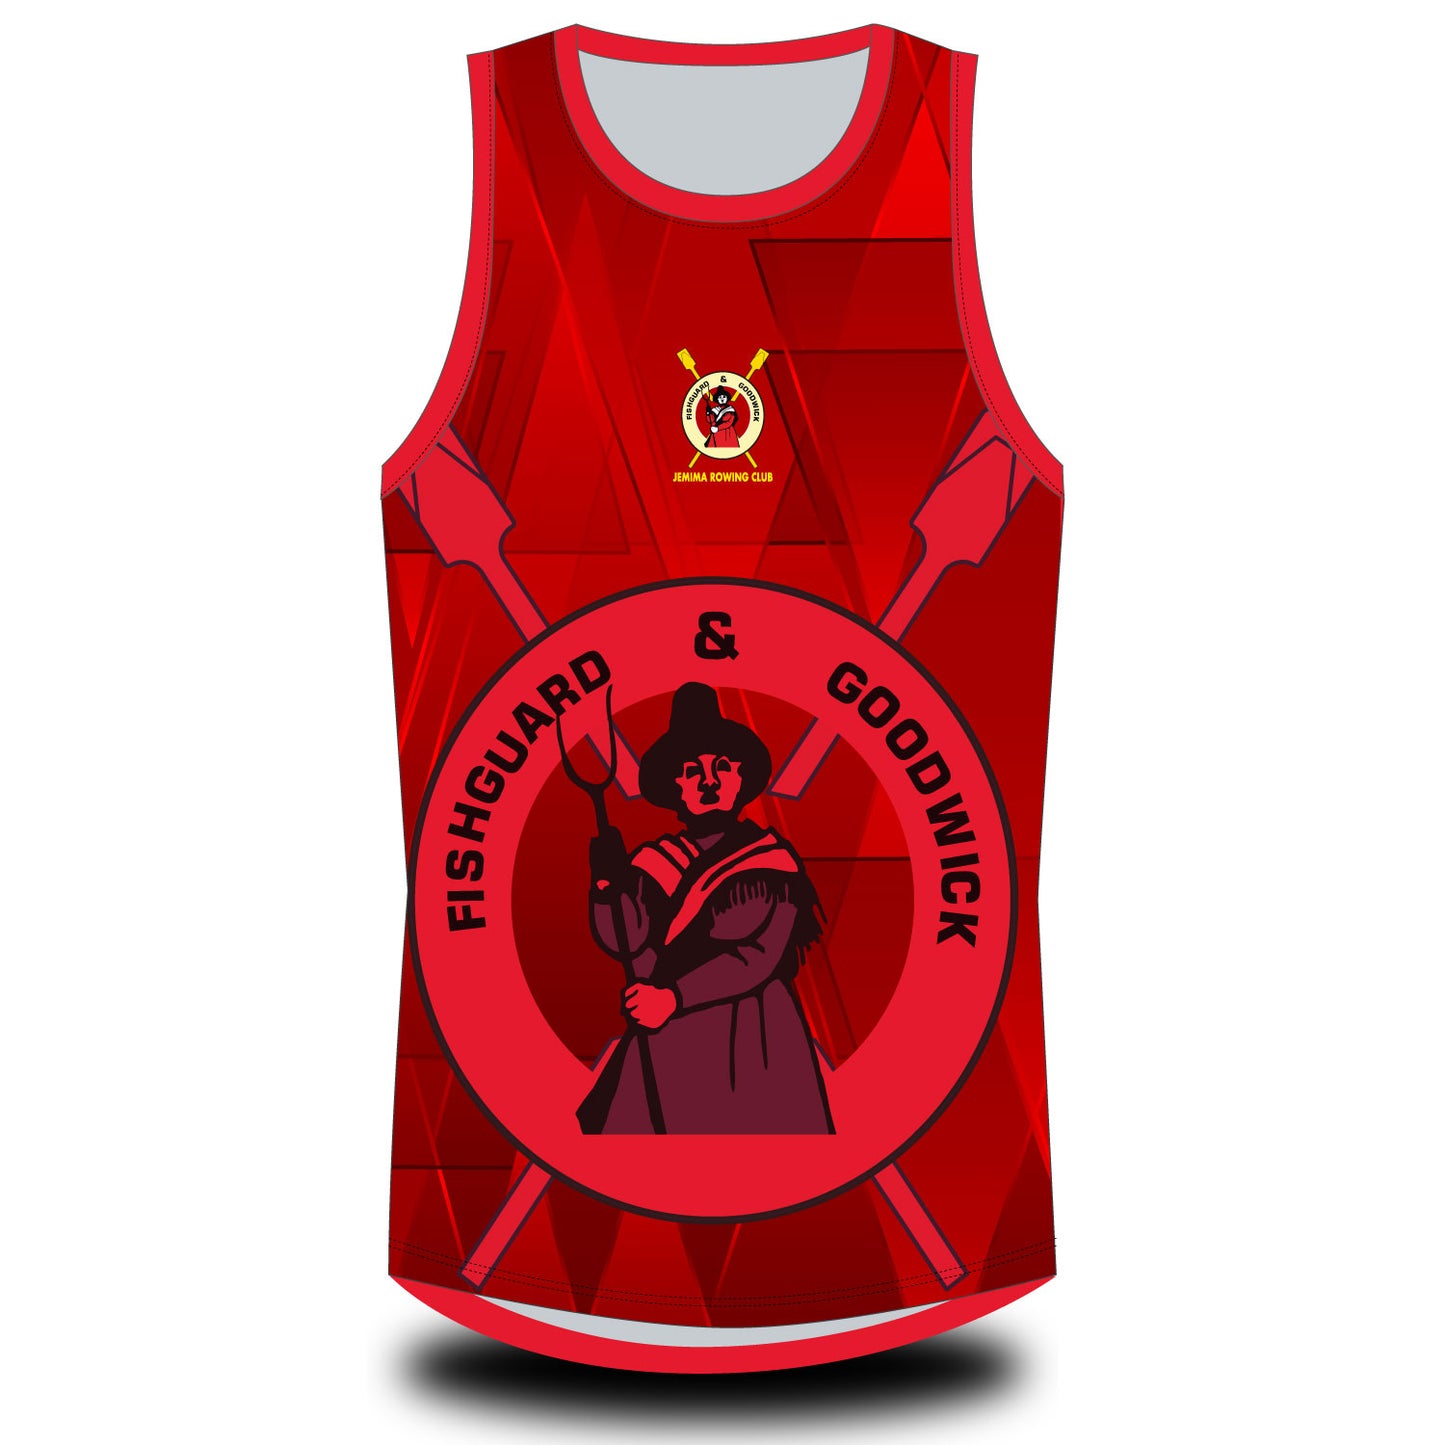 Fishguard and Goodwick Sublimated Triangle Vest